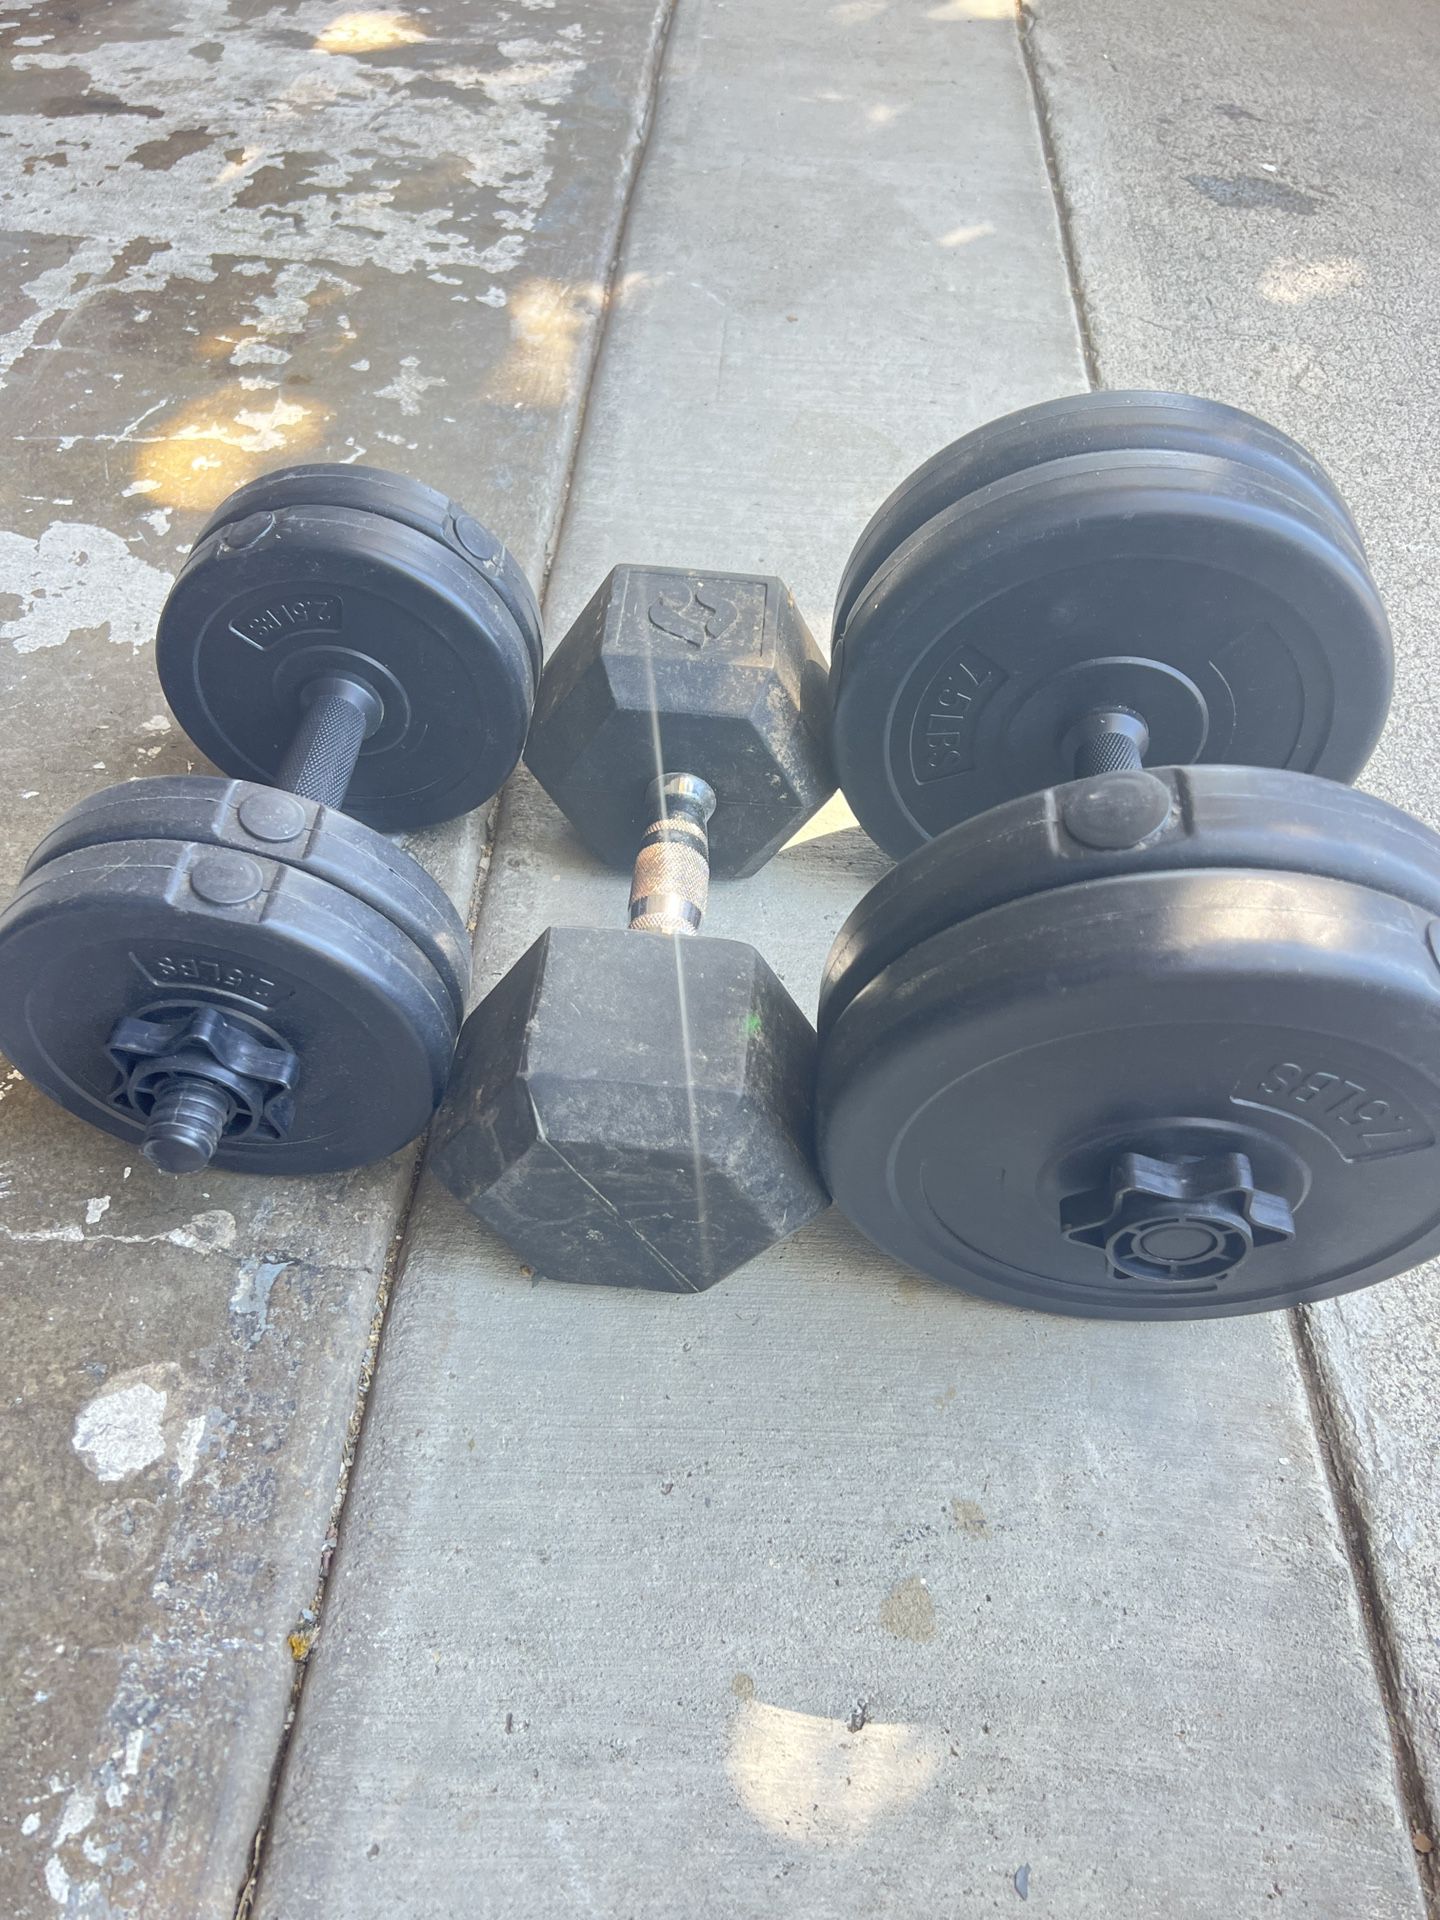 Weights/dumbbell weights